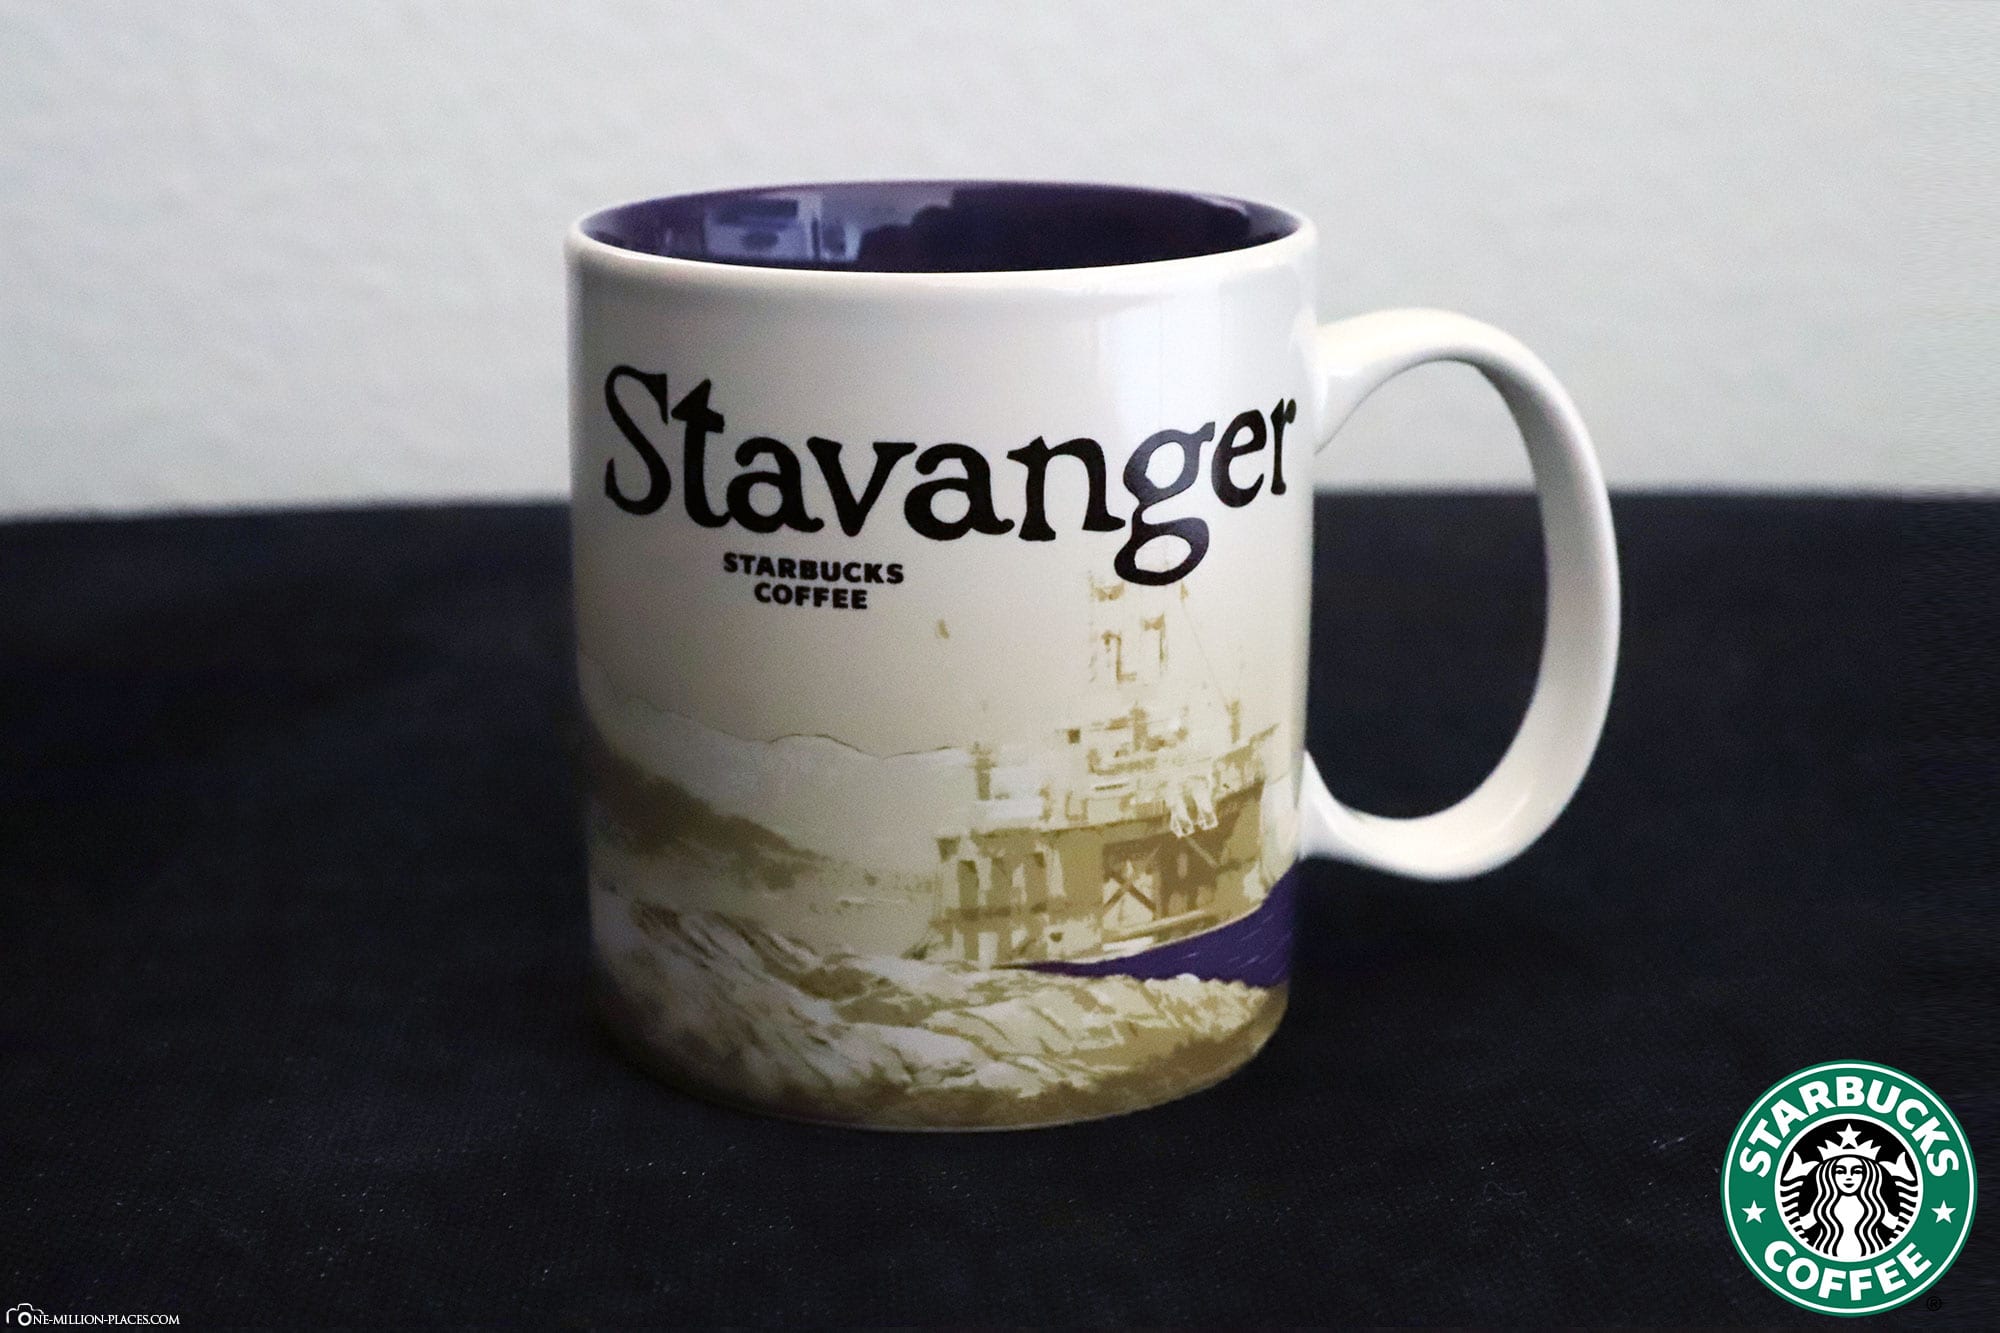 Stavanger, Starbucks Cup, Global Icon Series, City Mugs, Collection, Norway, Travelreport